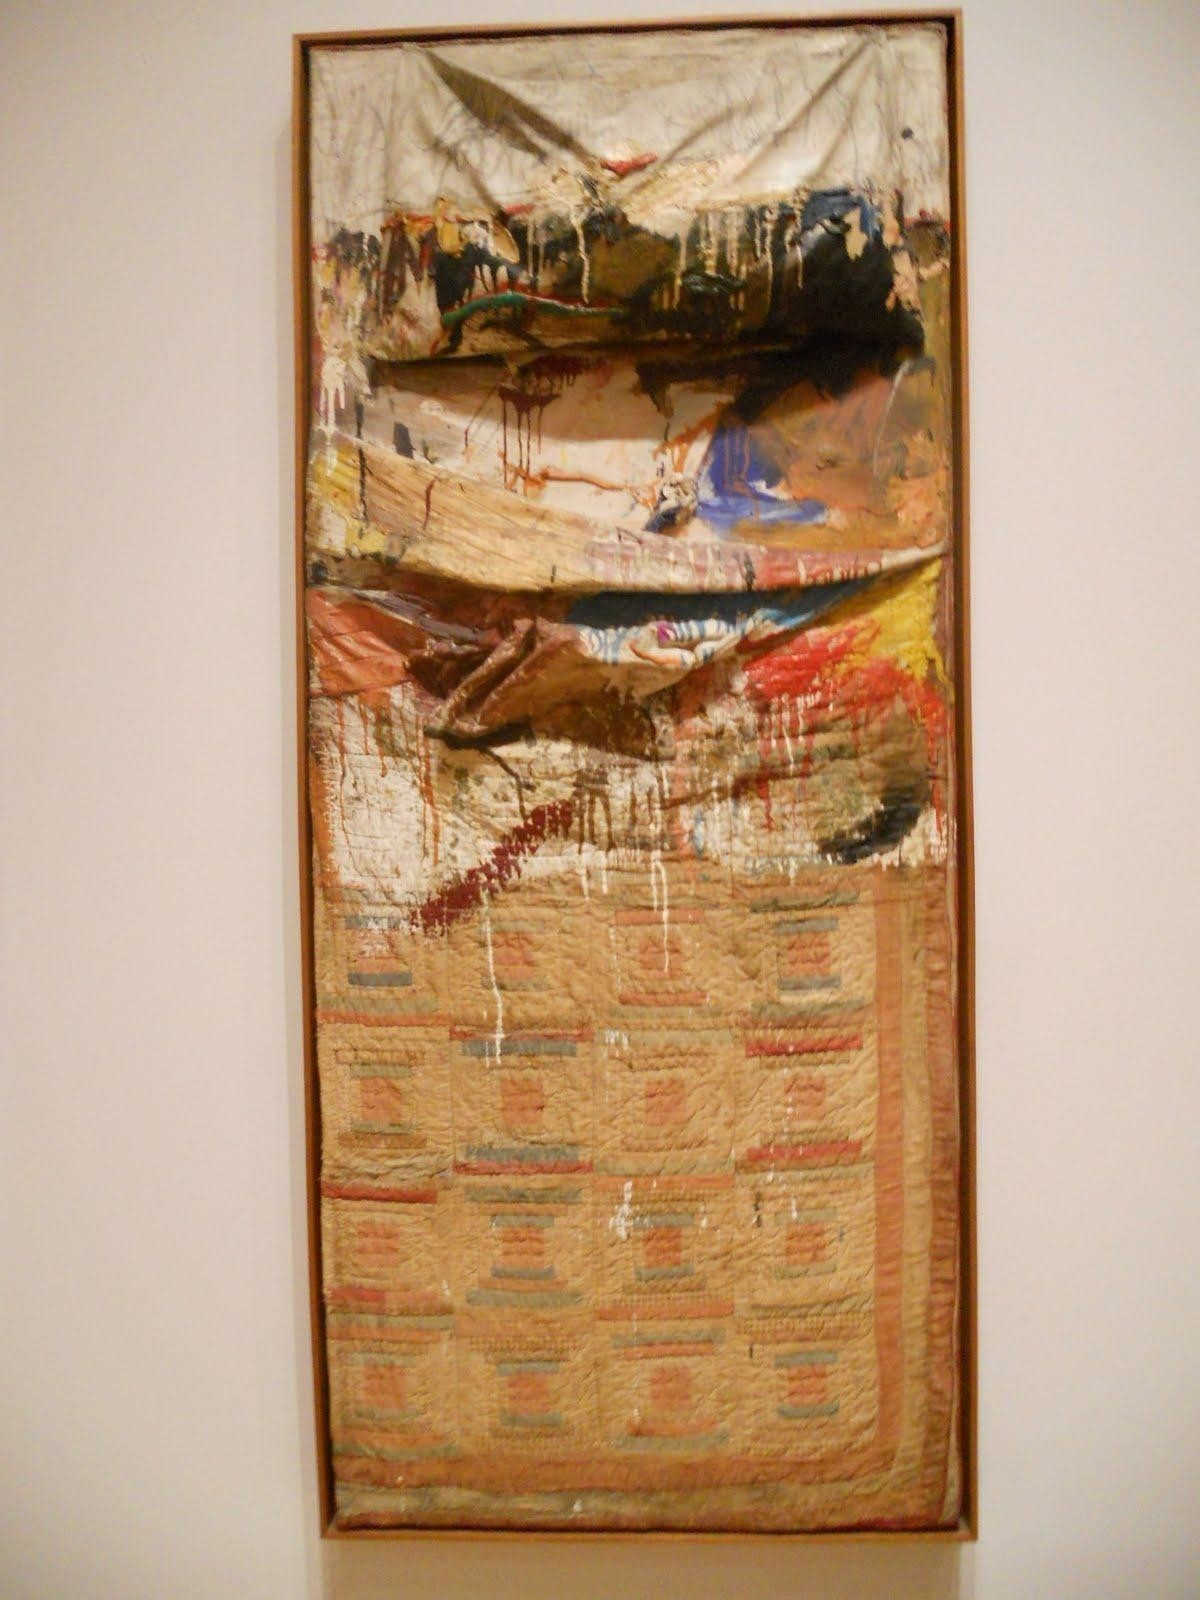 Robert Rauschenberg. Bed. 1955. Oil and pencil on pillow, quilt, and sheet on wood supports. 191.1 x 80 x 20.3 cm. The Museum of Modern Art (New York City, United States).